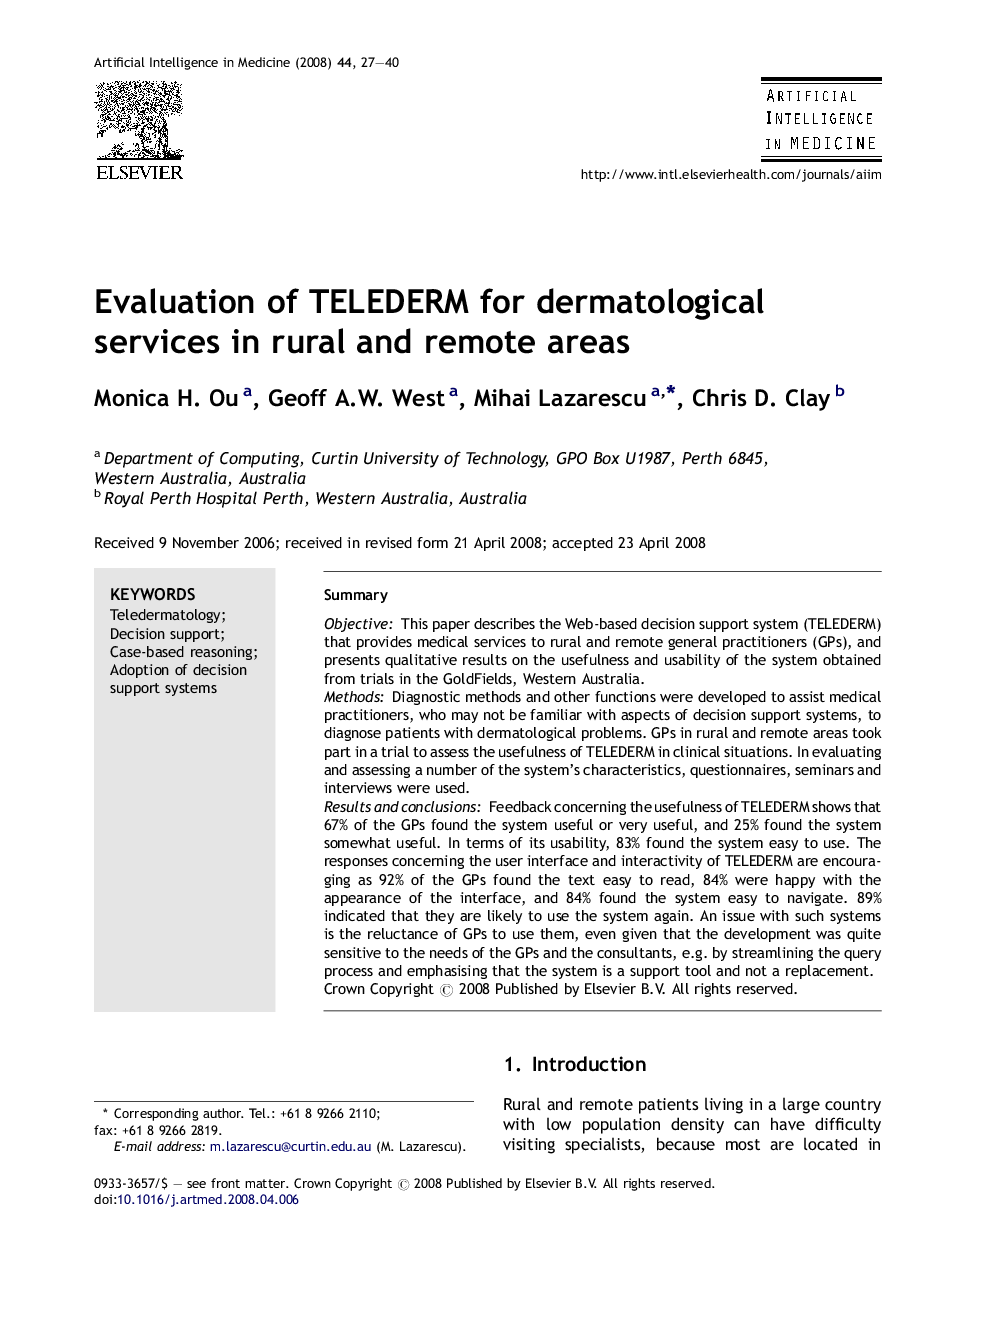 Evaluation of TELEDERM for dermatological services in rural and remote areas